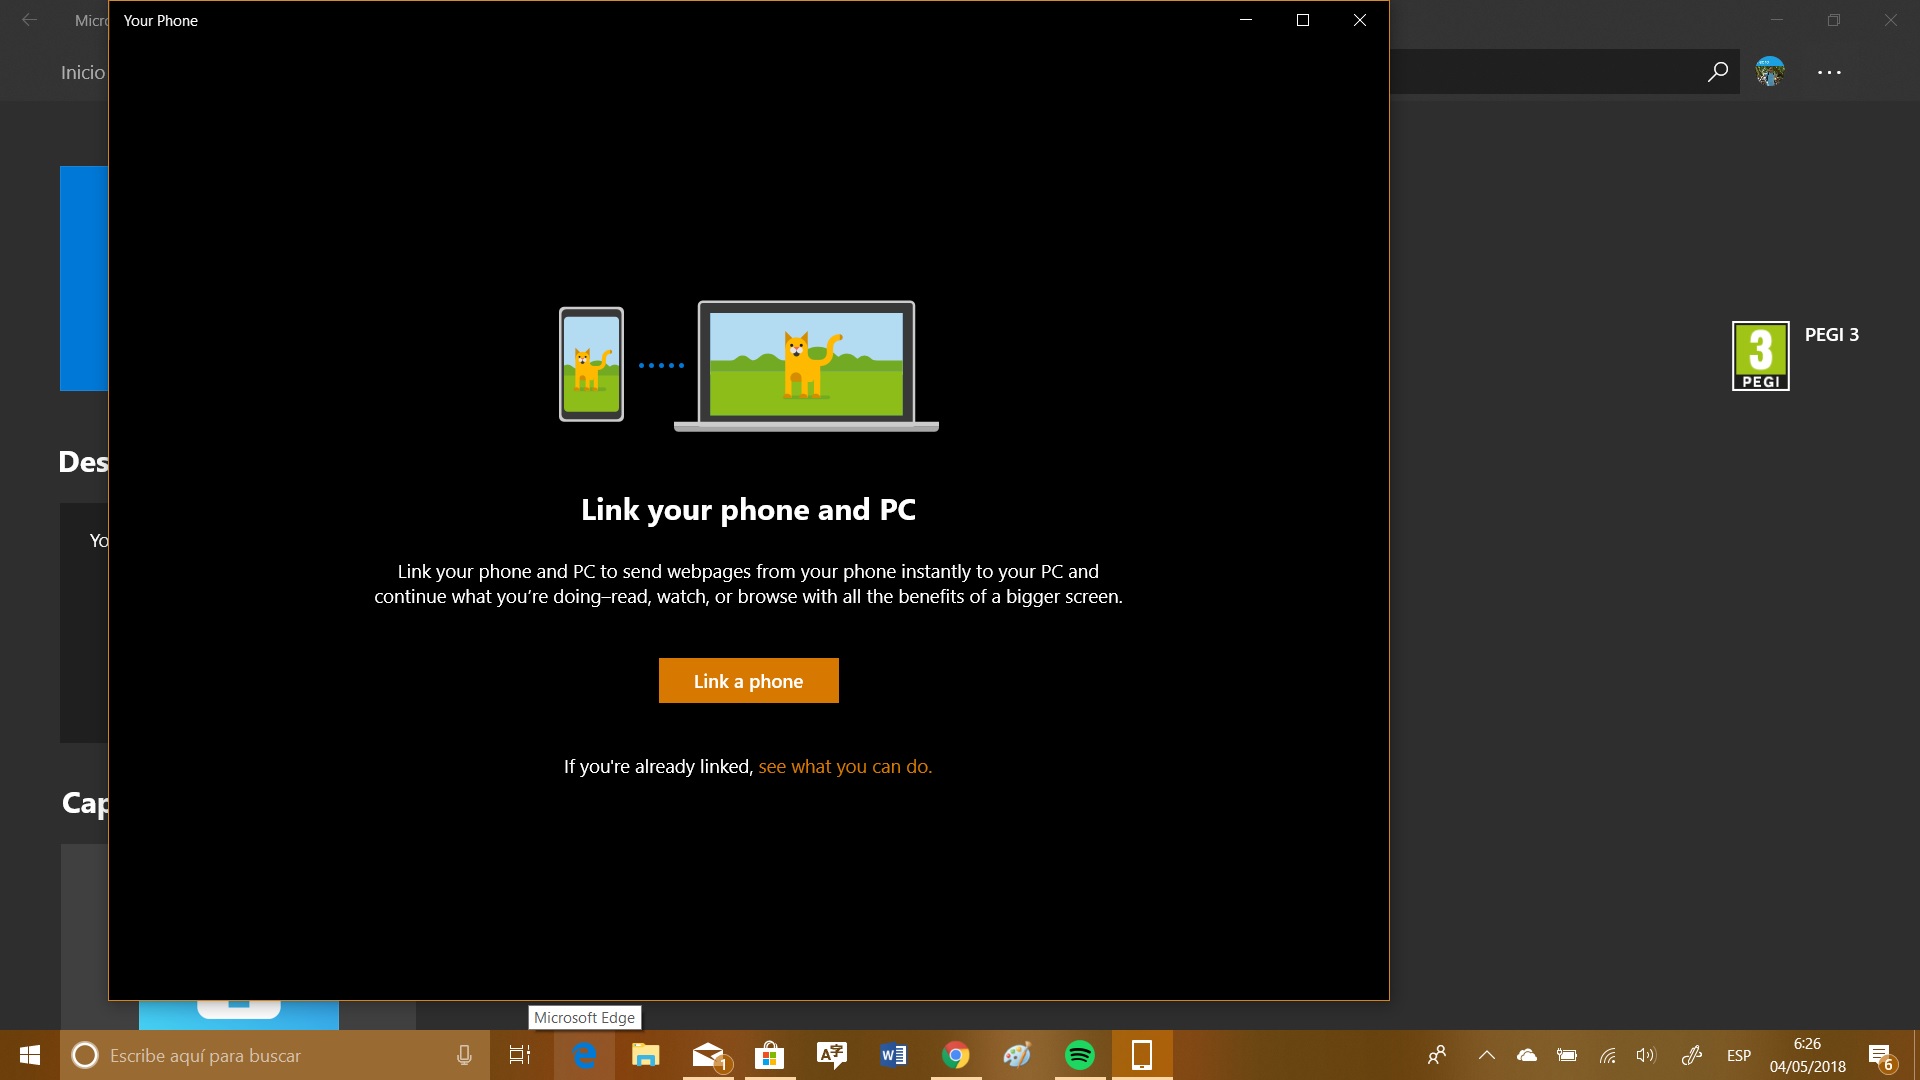 Microsoft Apps para Android se actualiza añadiendo Your Phone